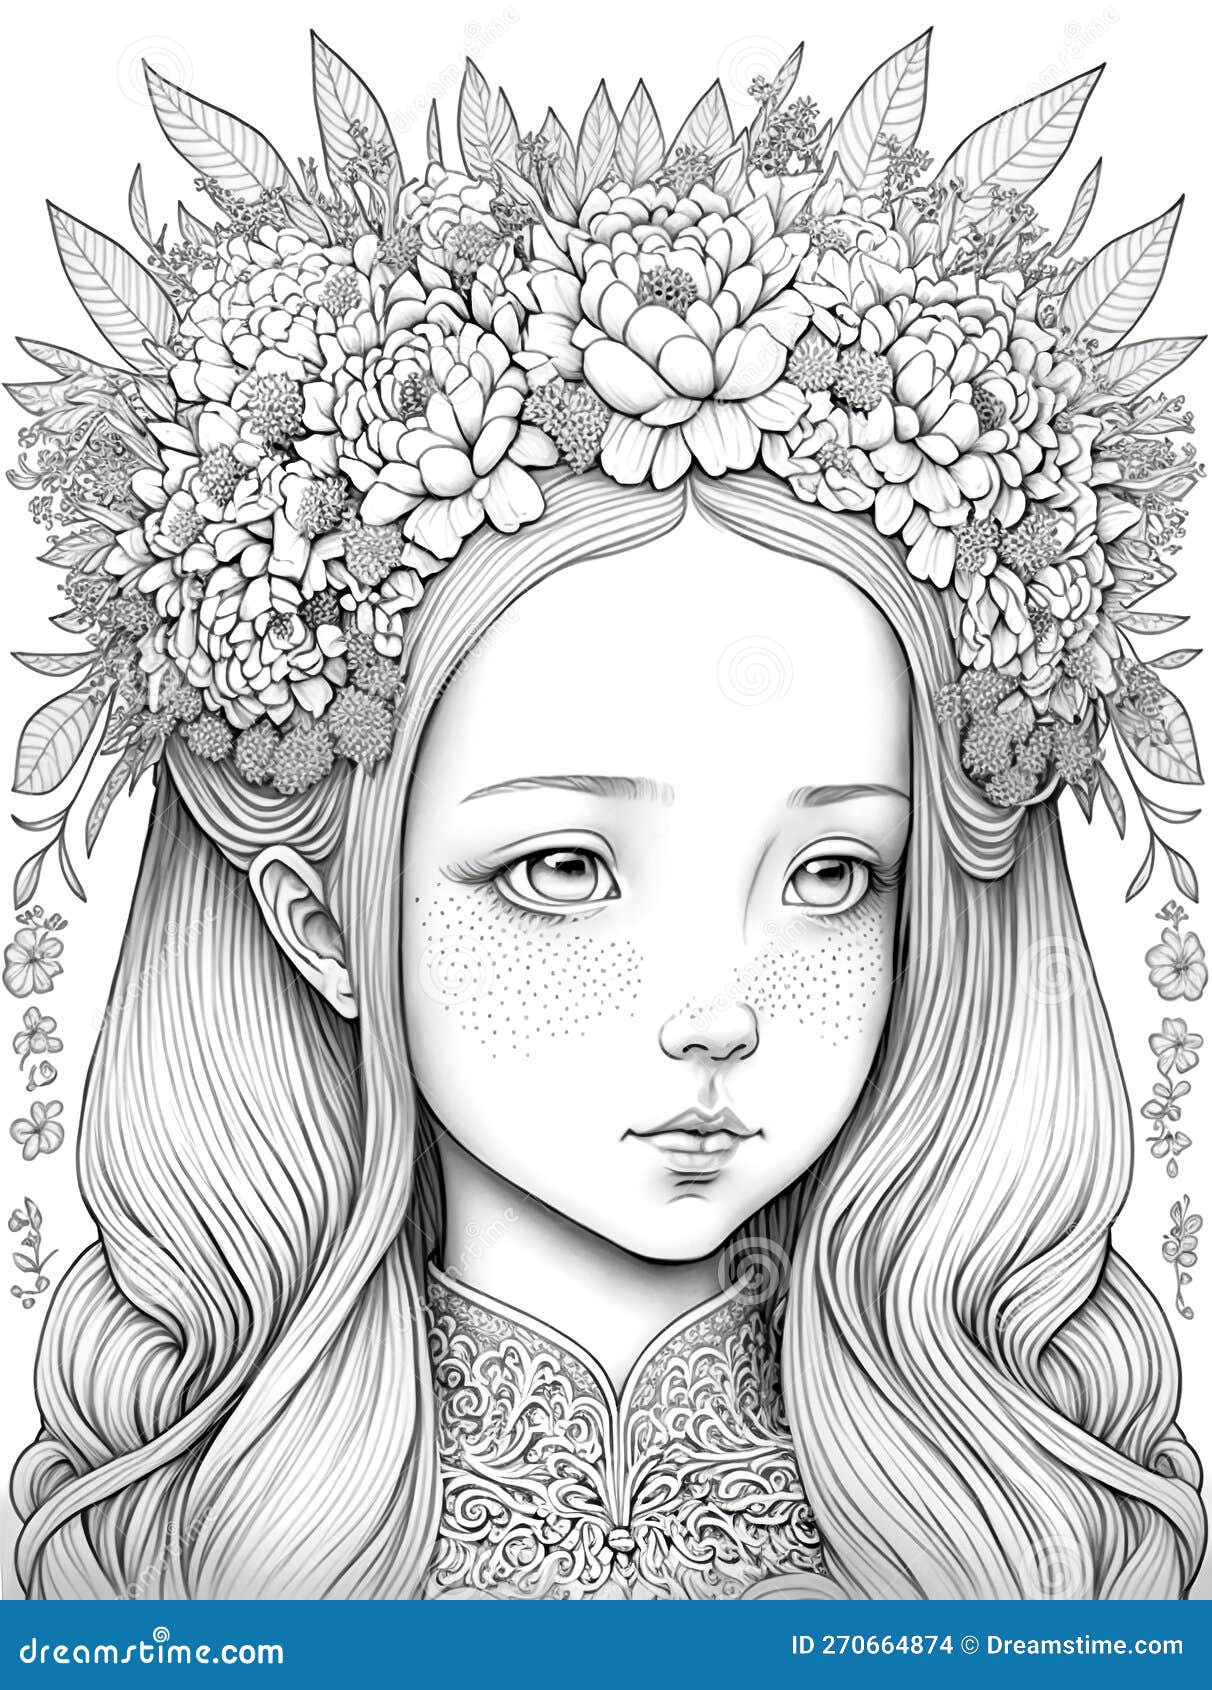 Black and White Pencil Drawing, Portrait of a Princess, Girl with a ...